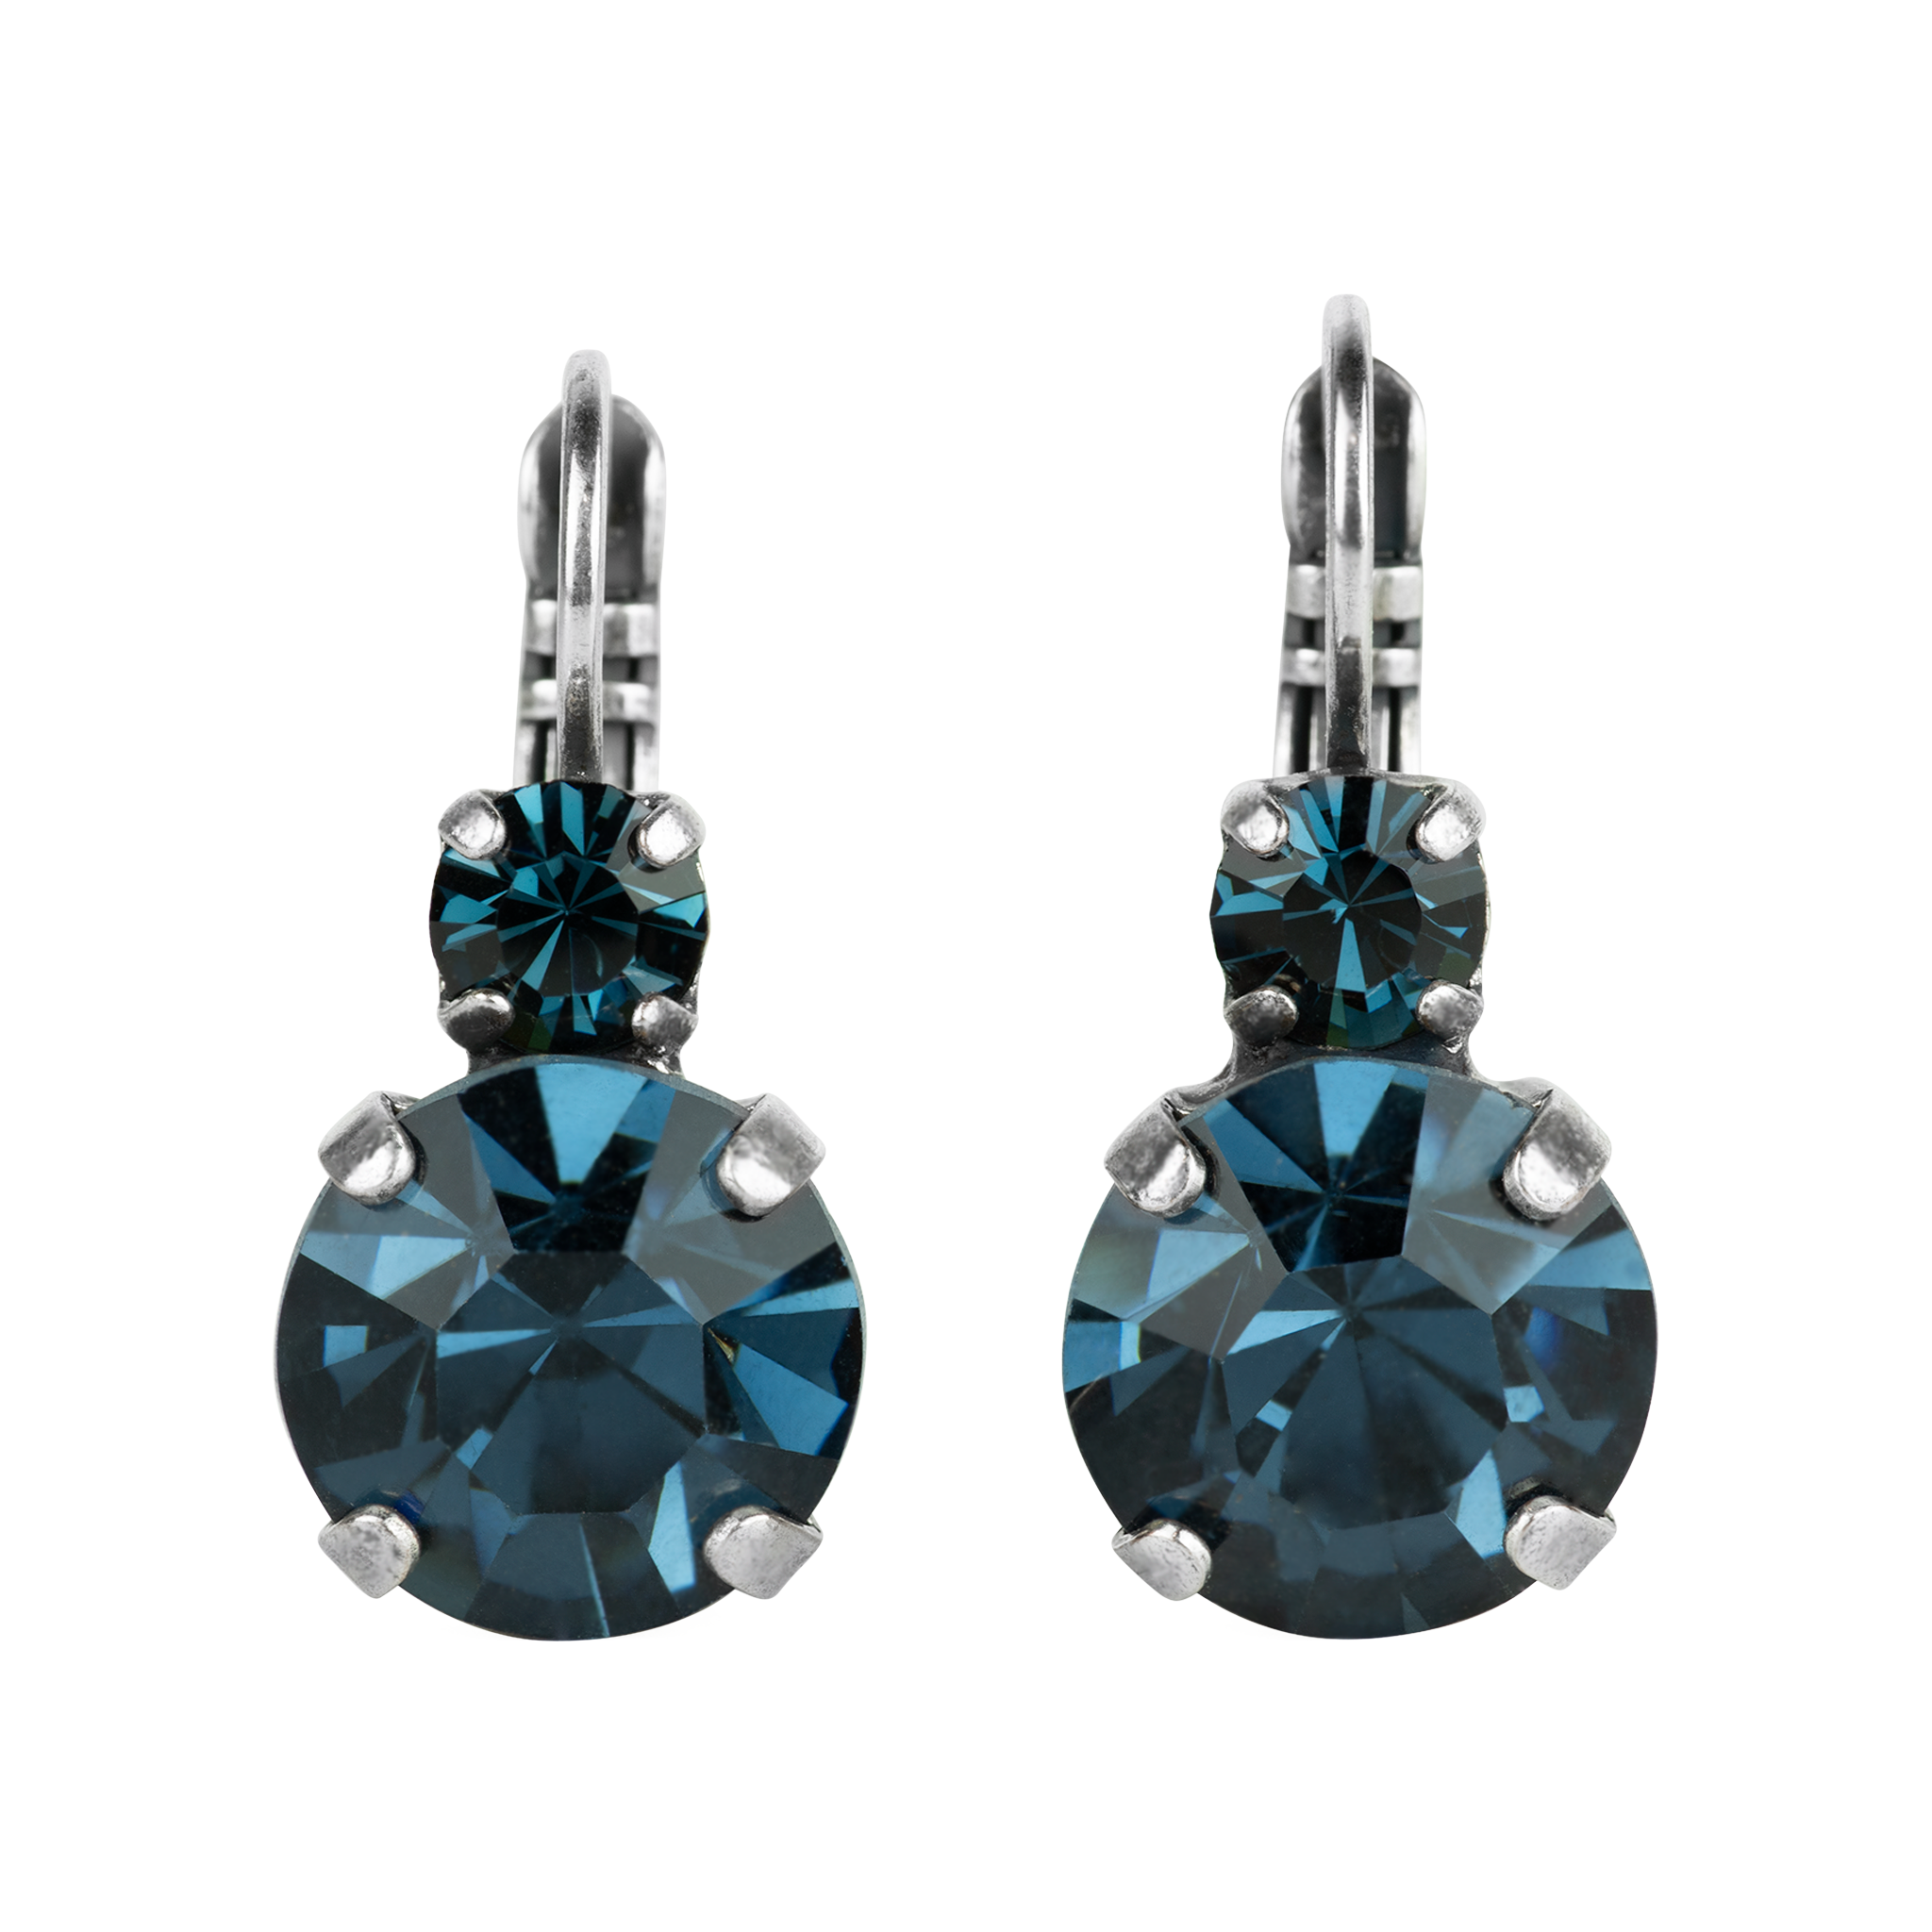 Large Double Stone Leverback Earrings in "Montana Blue" *Preorder*